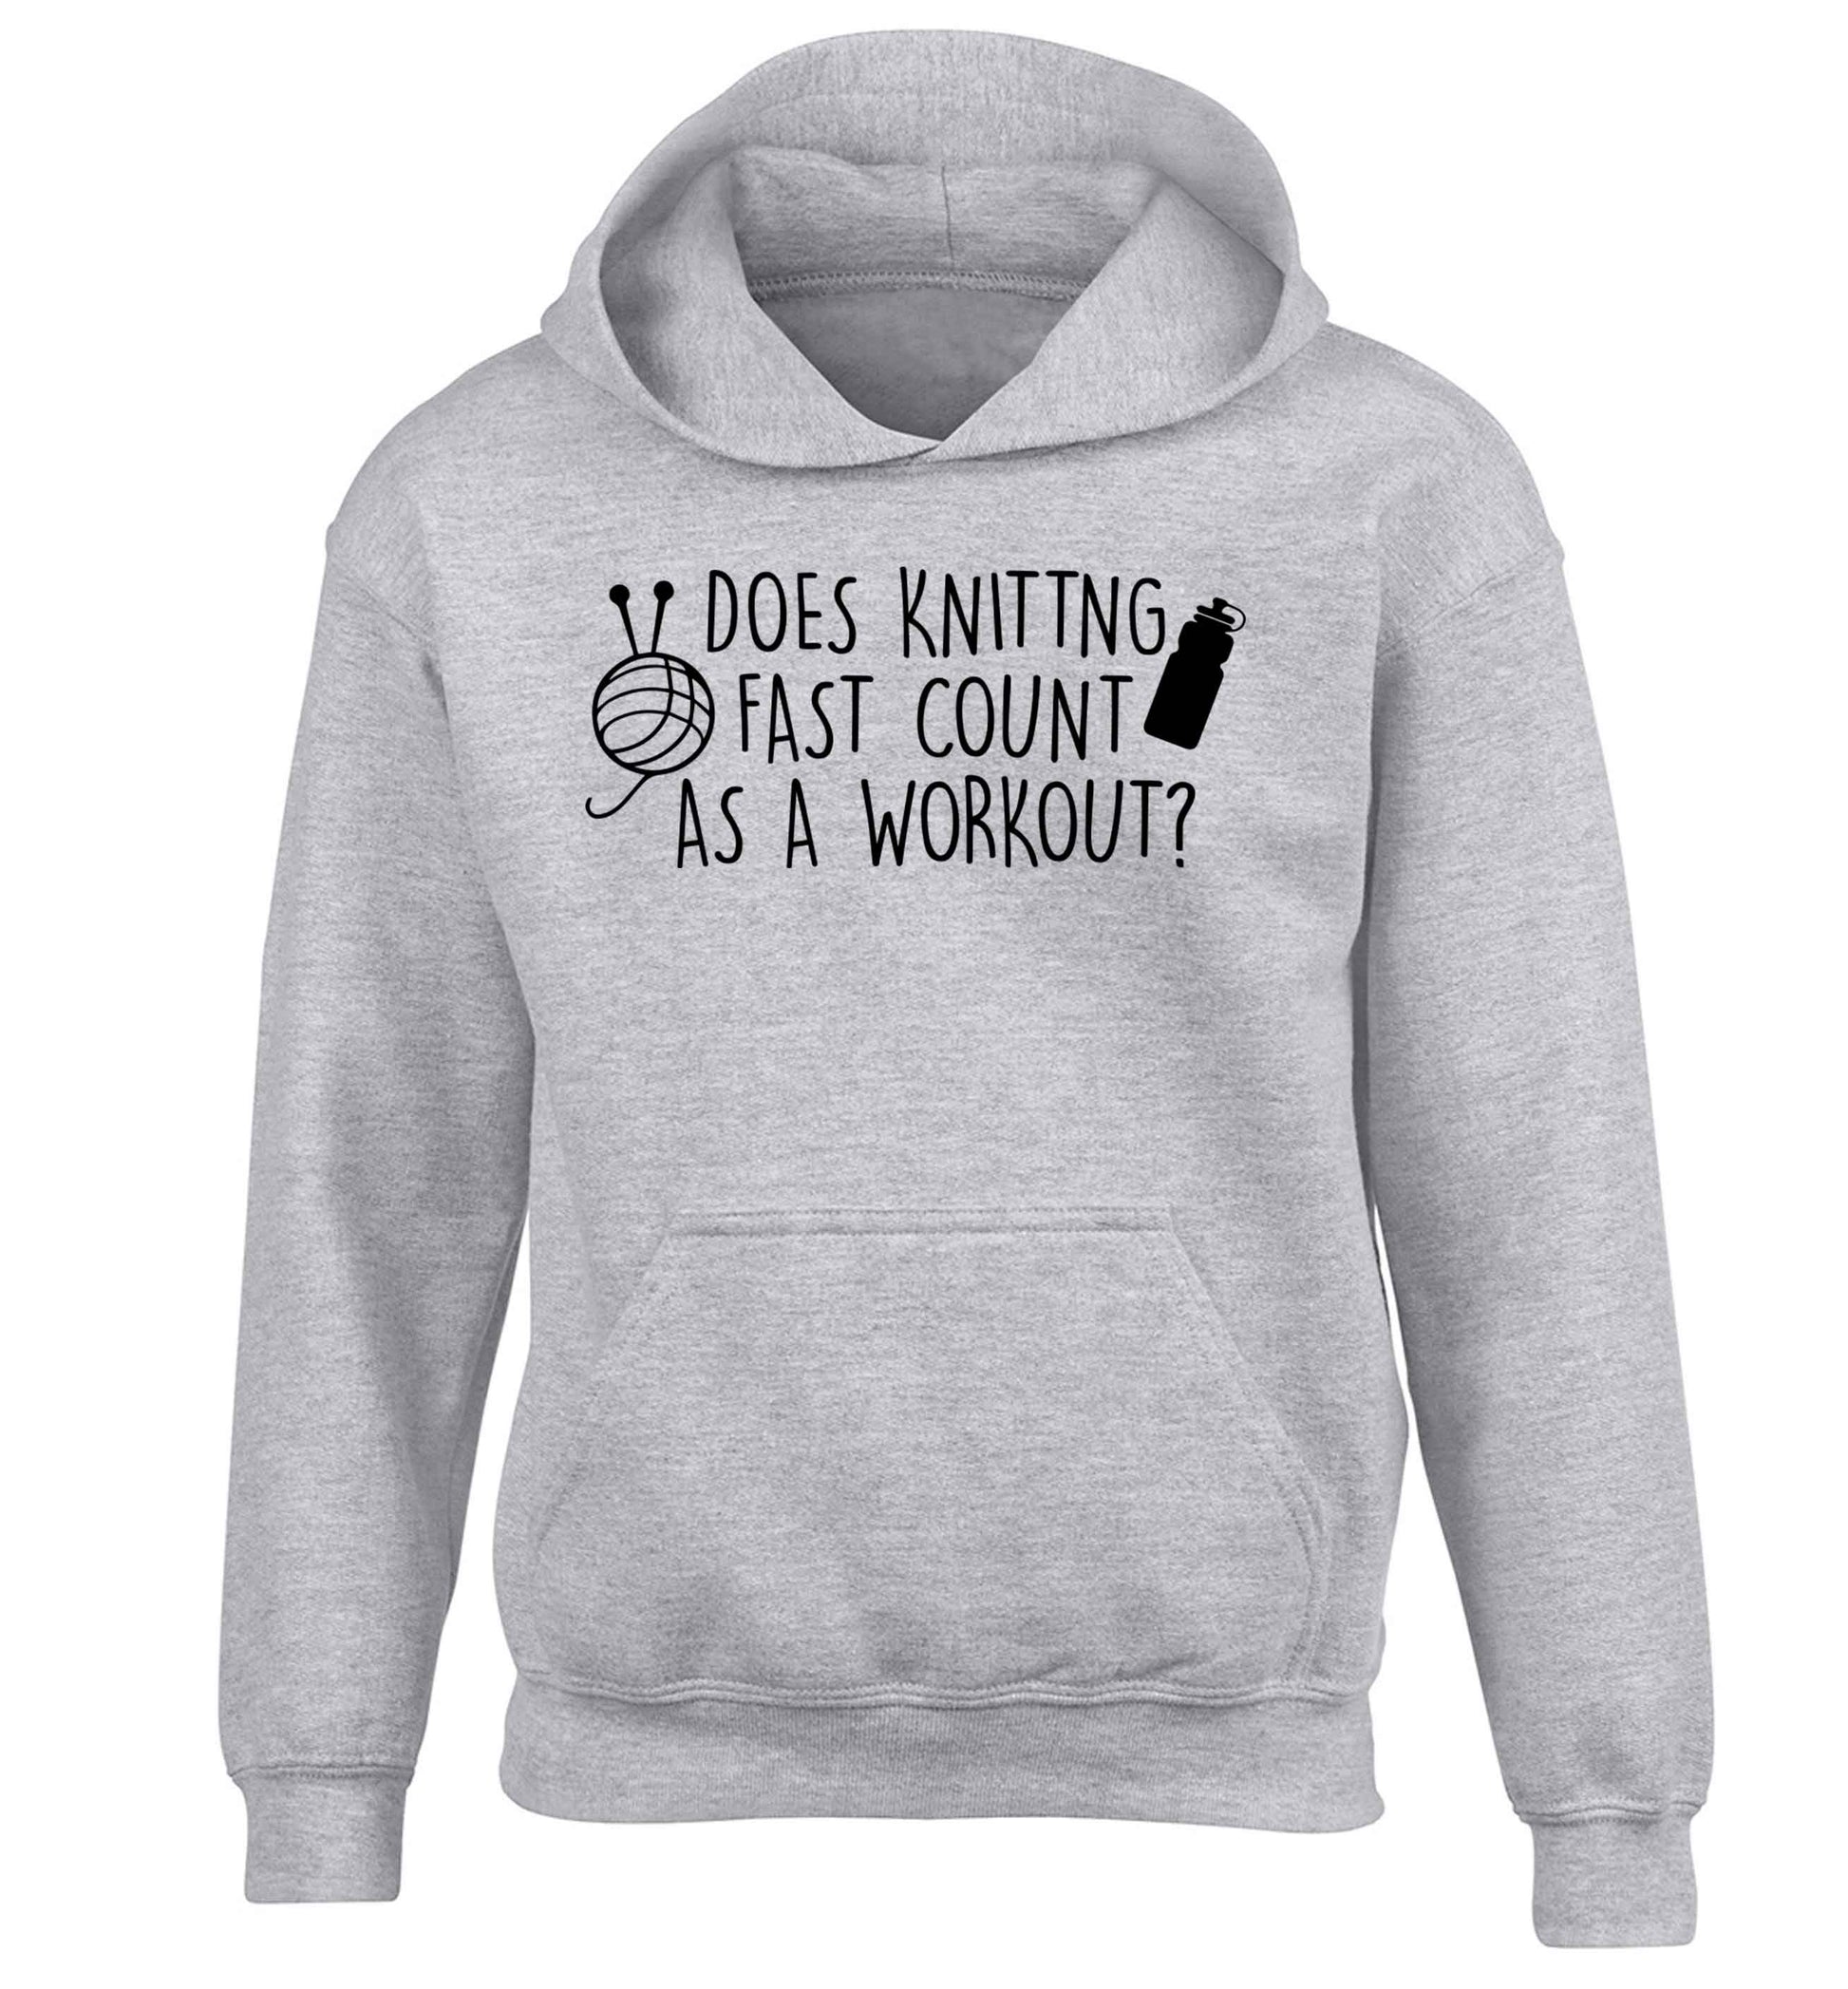 Does knitting fast count as a workout? children's grey hoodie 12-13 Years